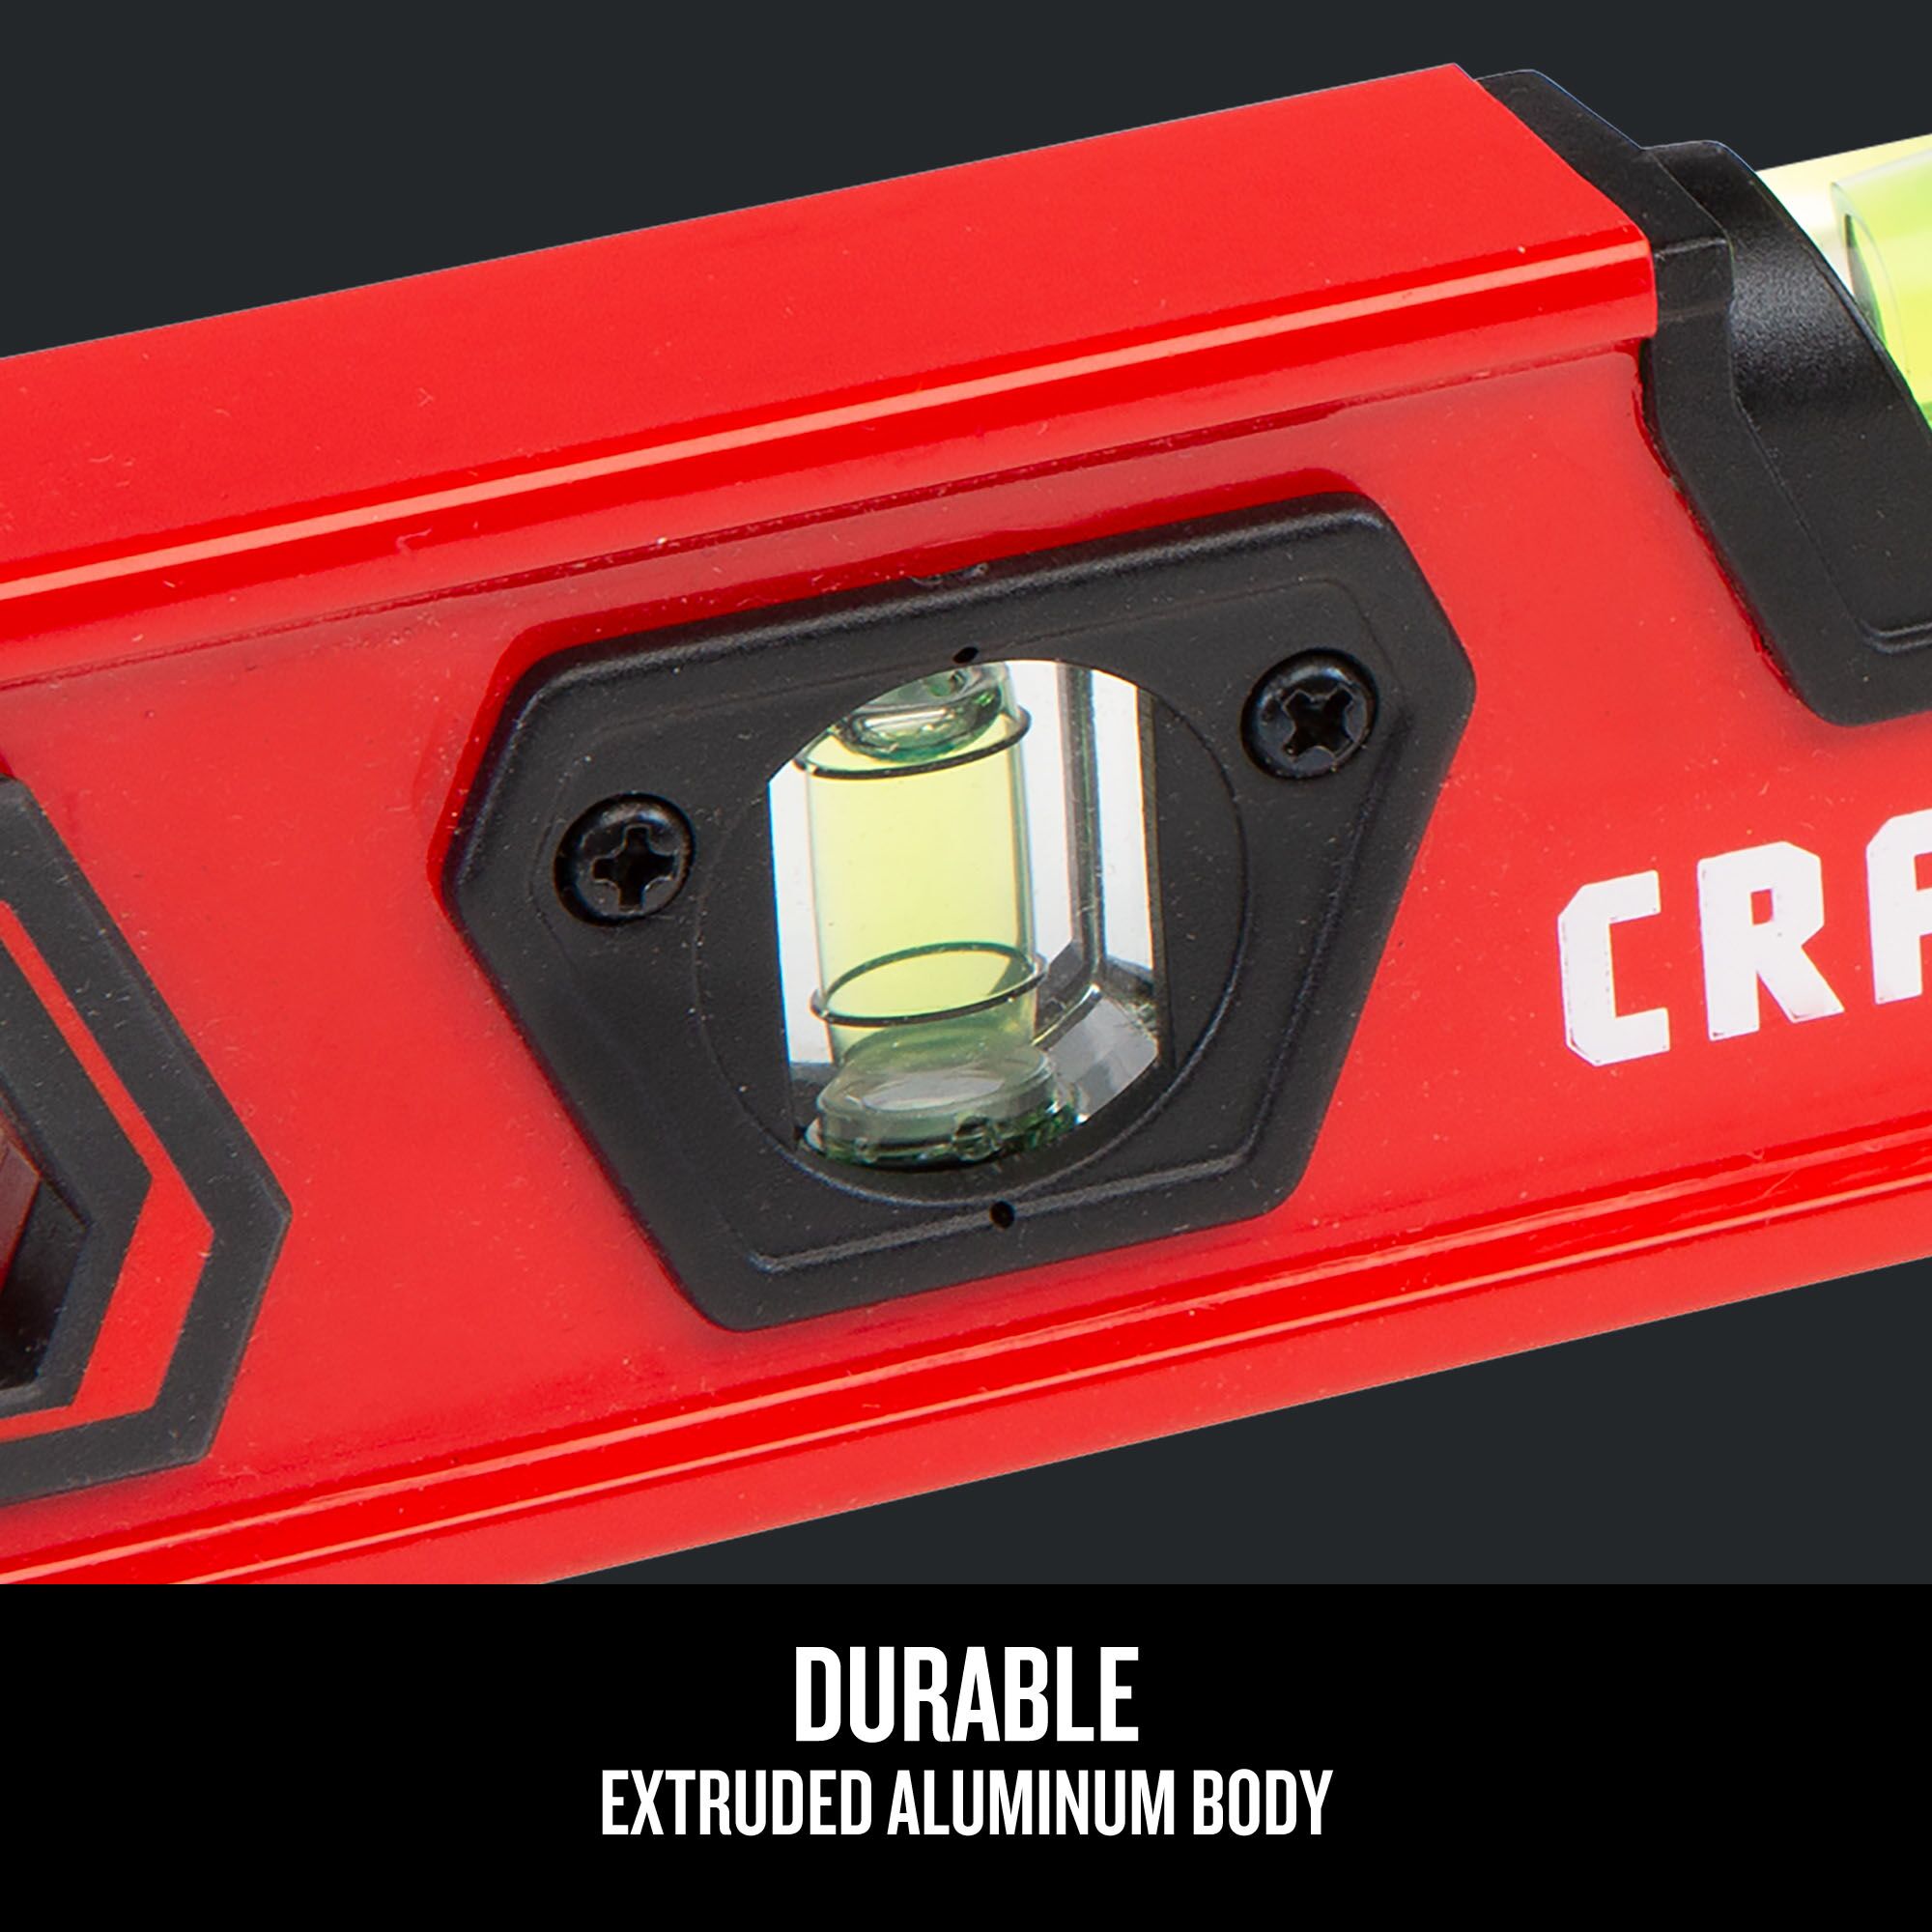 Graphic of CRAFTSMAN Level: Standard highlighting product features